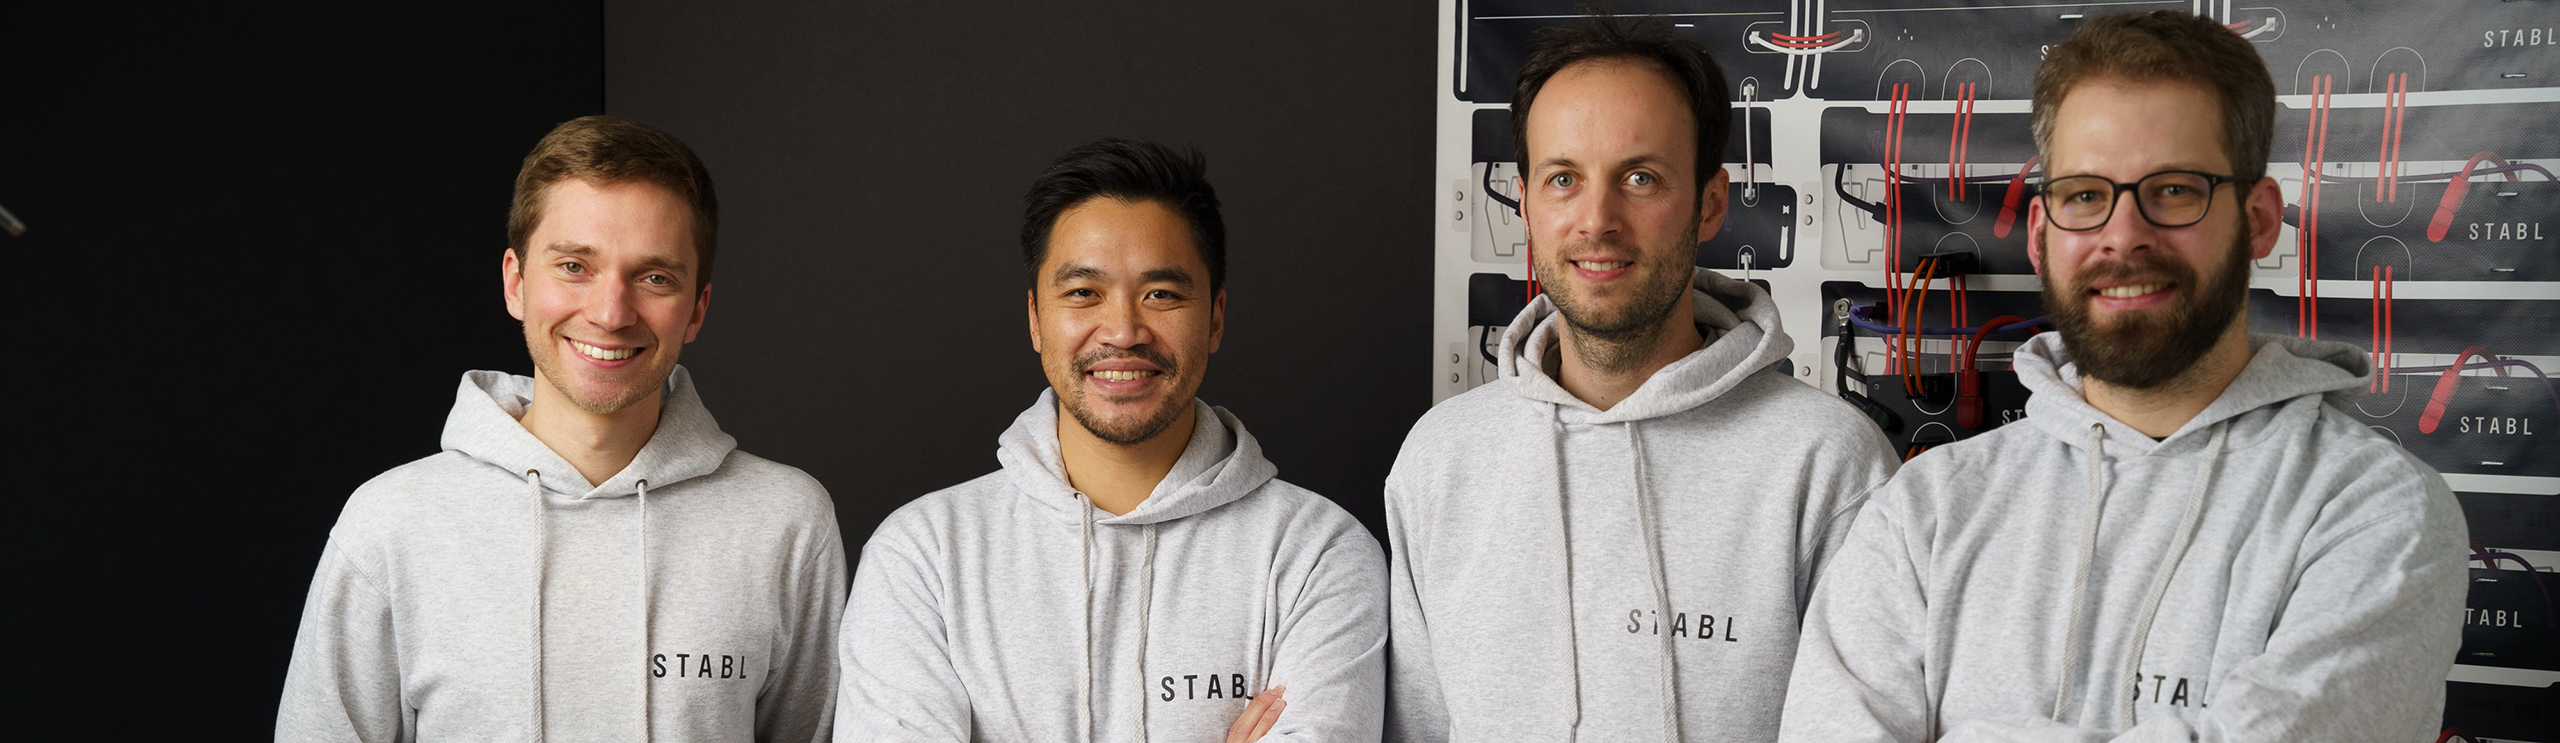 The founding team of STABL Energy (from left to right): TUM Alumni Dr. Arthur Singer, Christoph Dietrich and Dr. Nam Truong as well as Martin Sprehe.